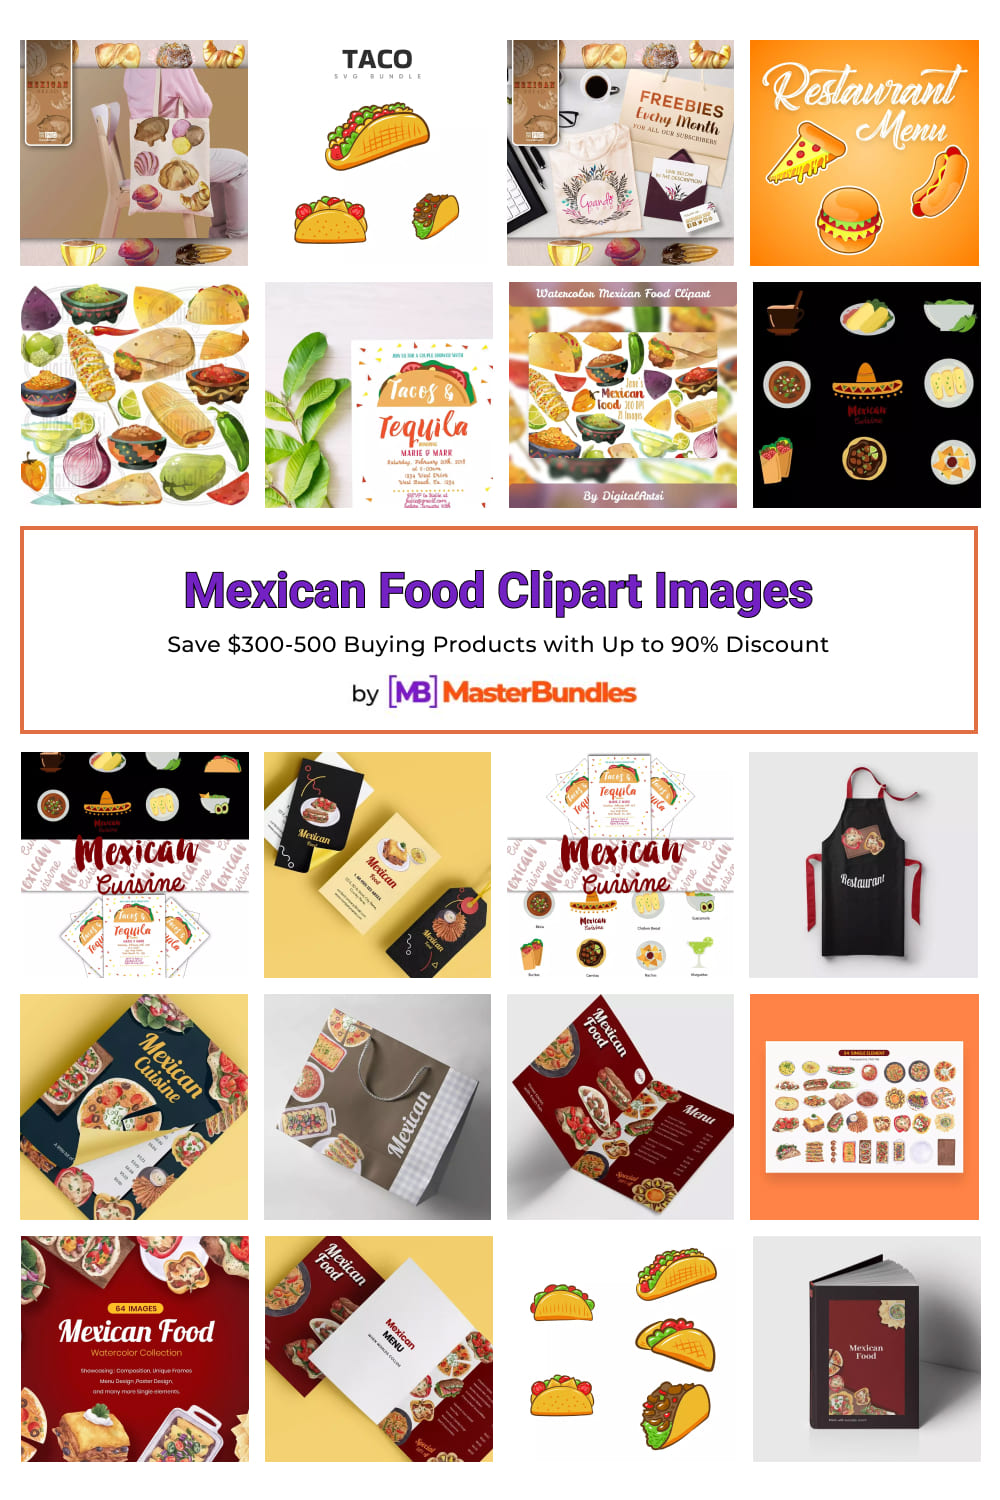 Mexican Food Clipart Images Pinterest image.